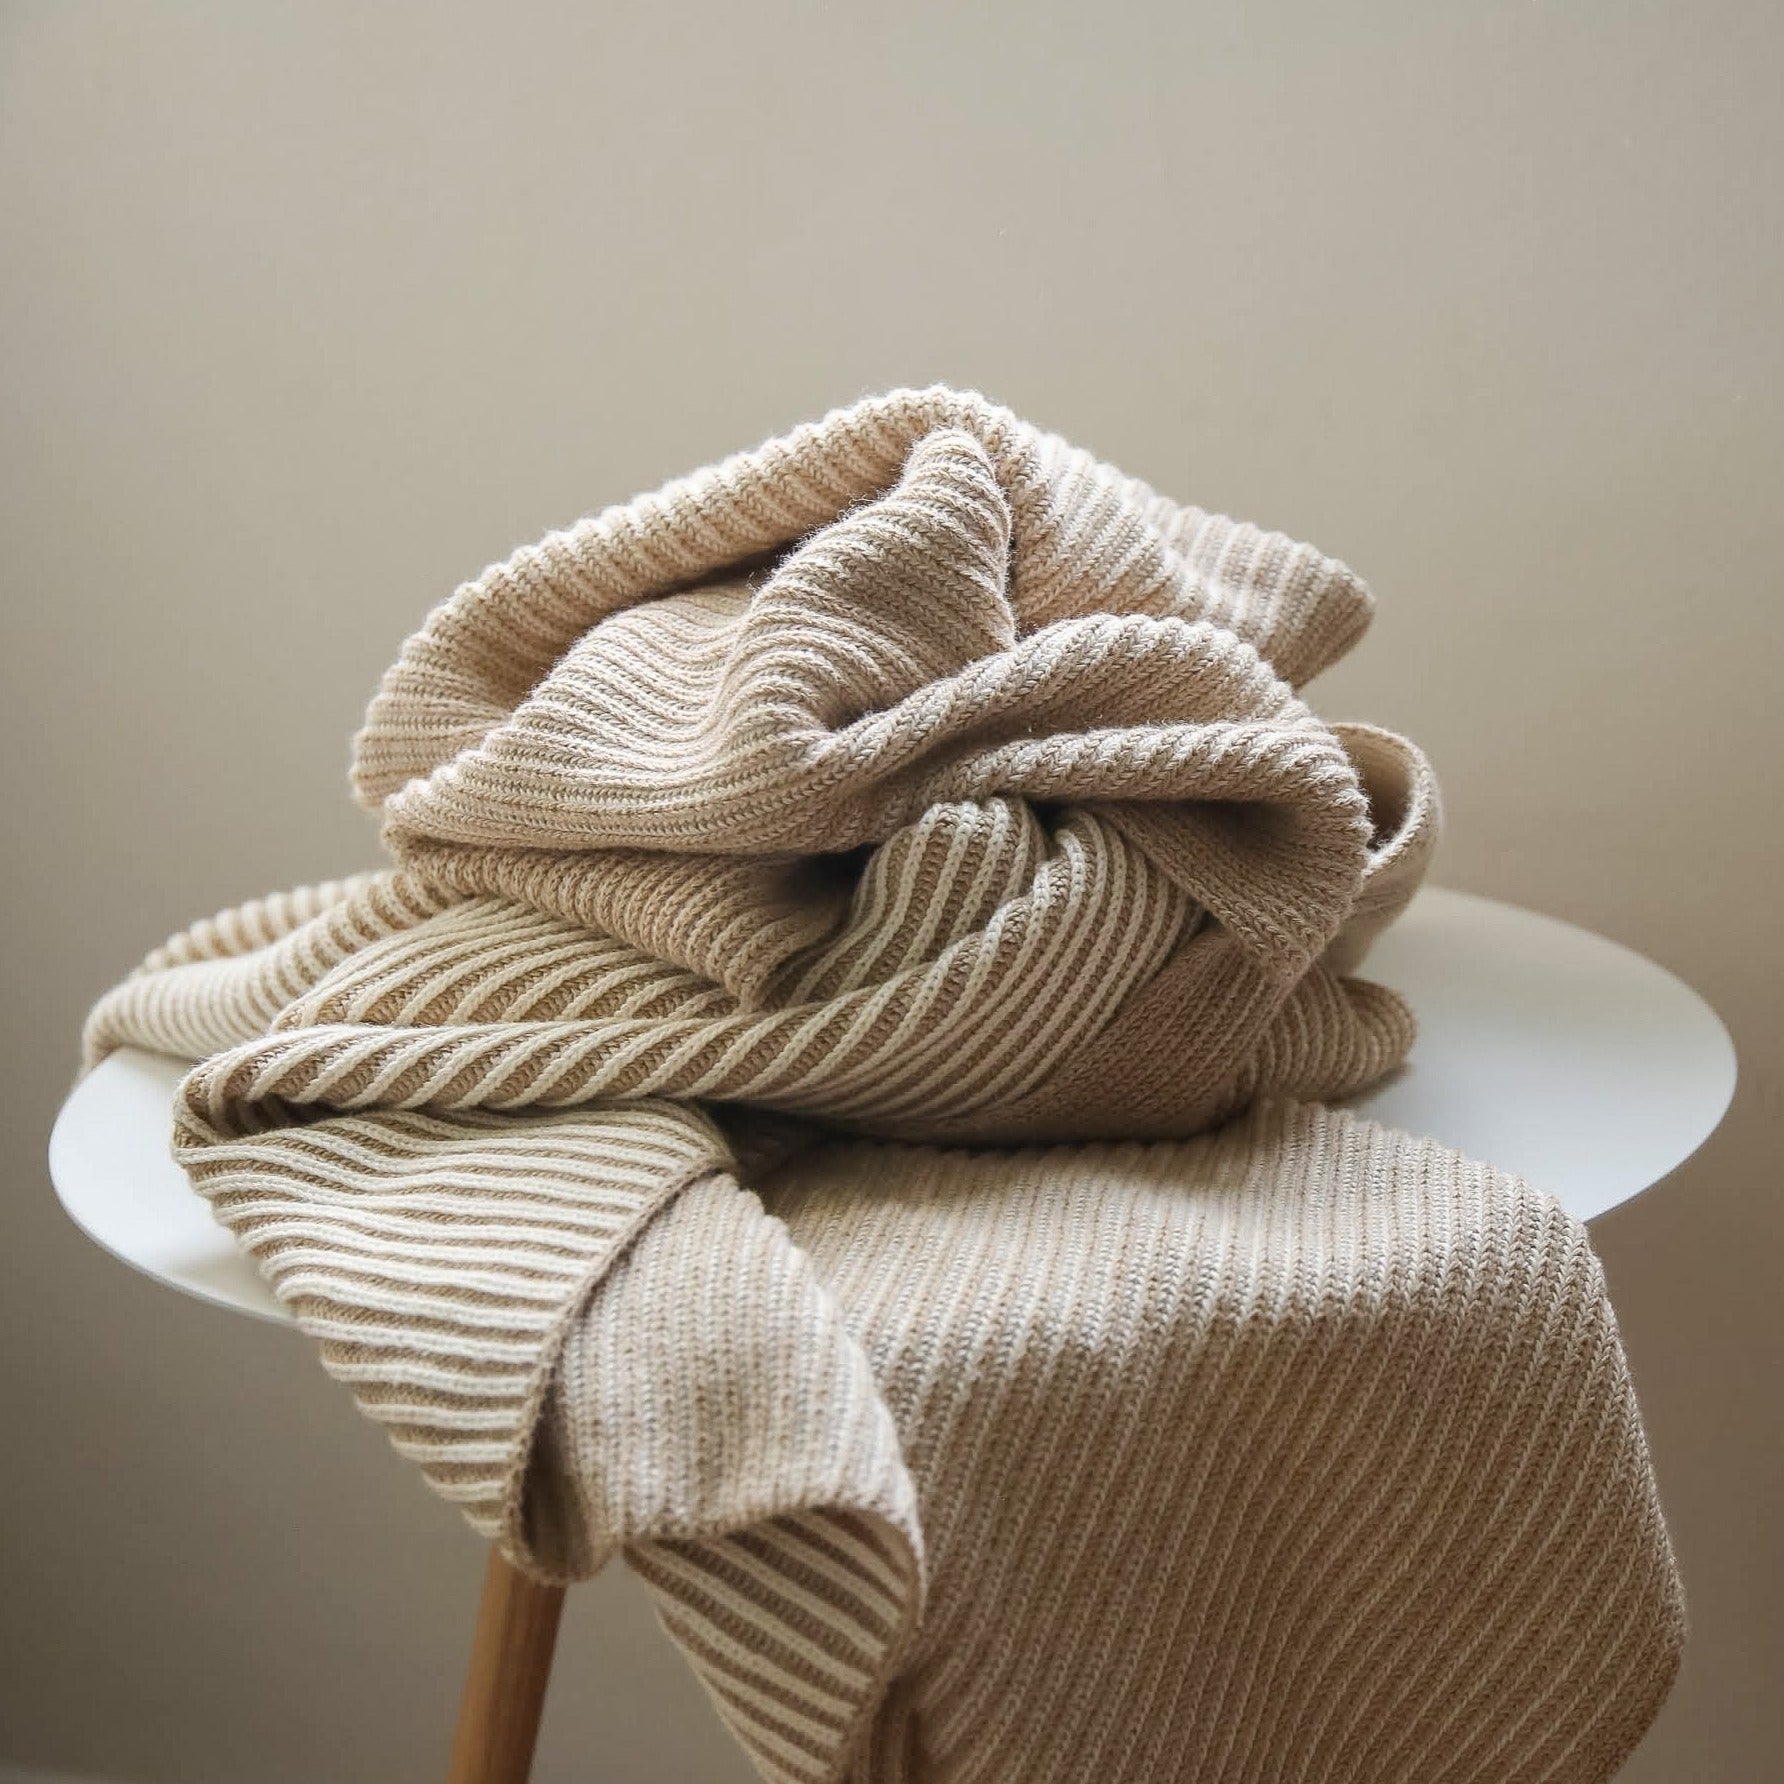 koko's nest | LINE Sand | 100% Organic Cotton | knit baby blanket | made in usa